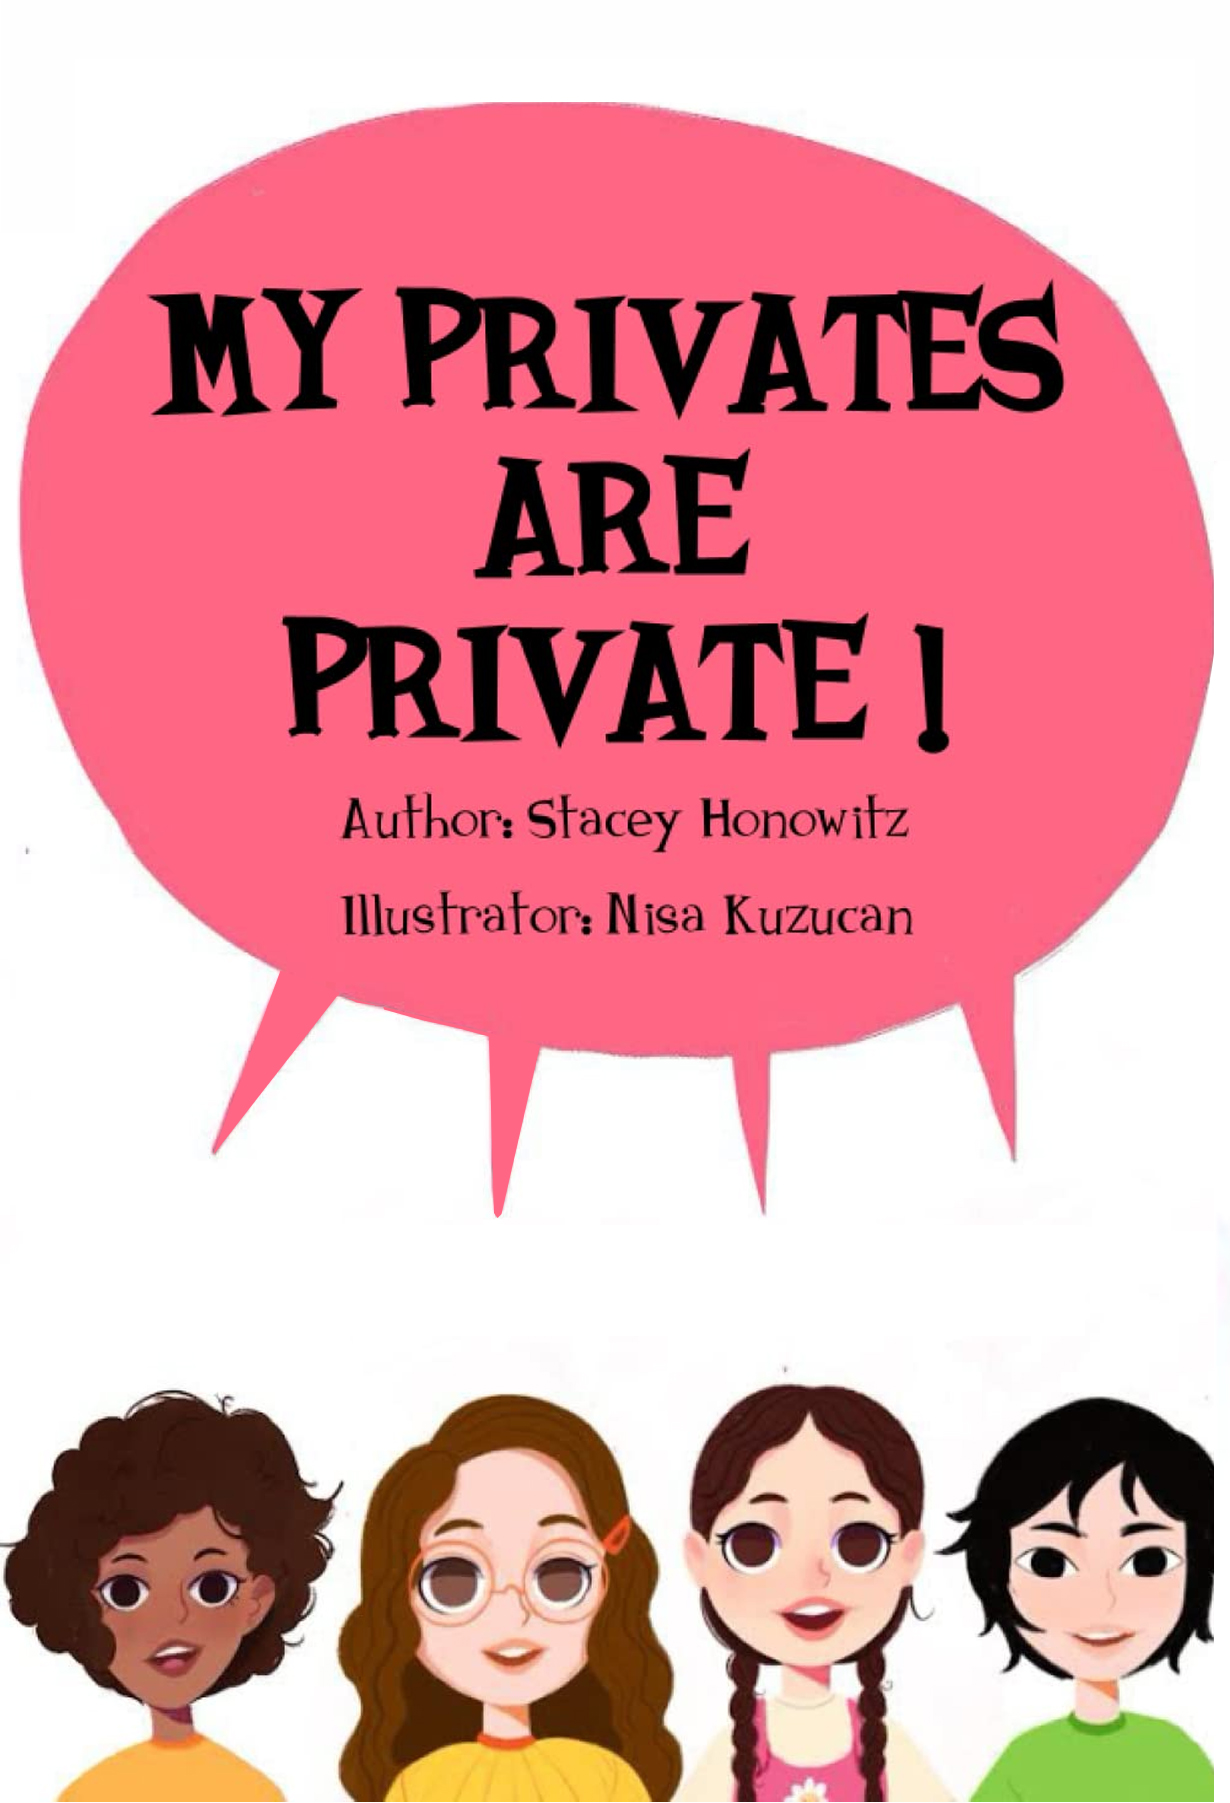 Cover of Stacey Honowitz's book - My Privates Are Private